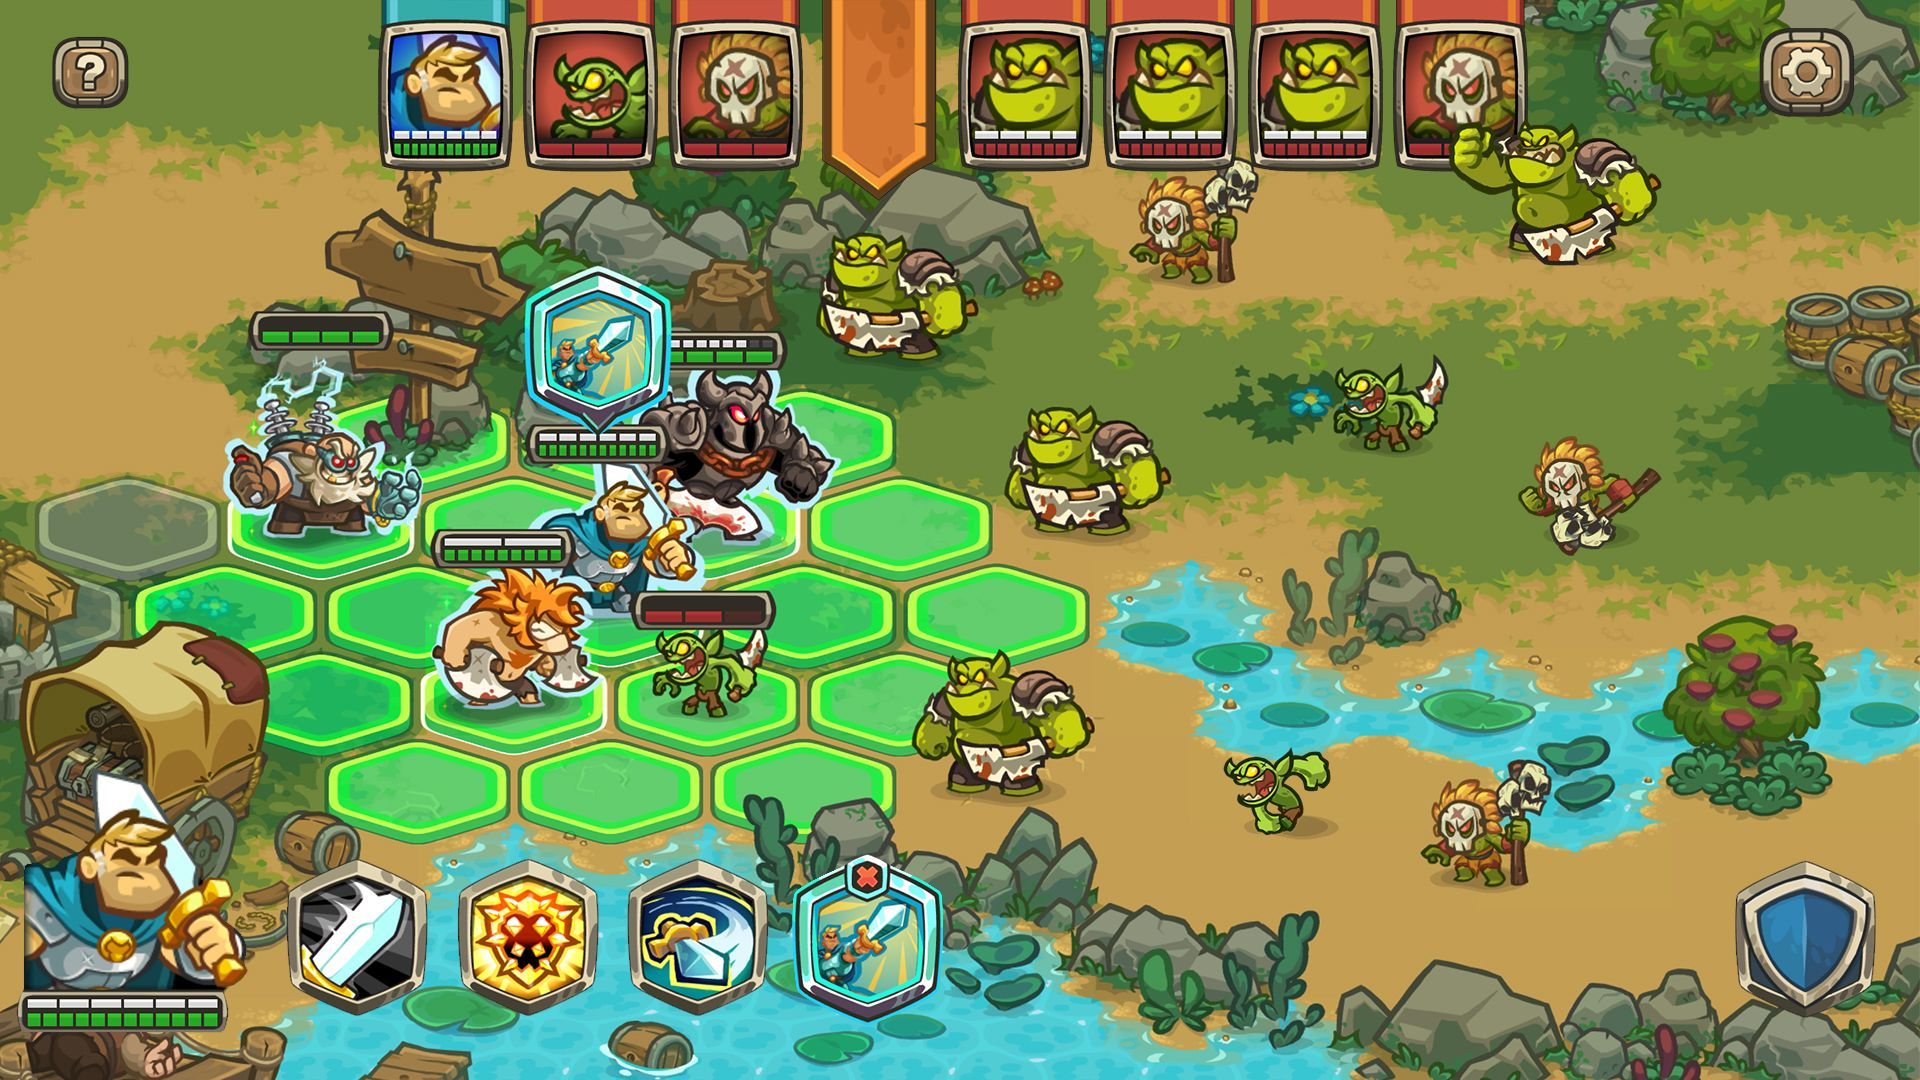 Screenshot from the game; a team of player heros advance on a group of goblin enemies.